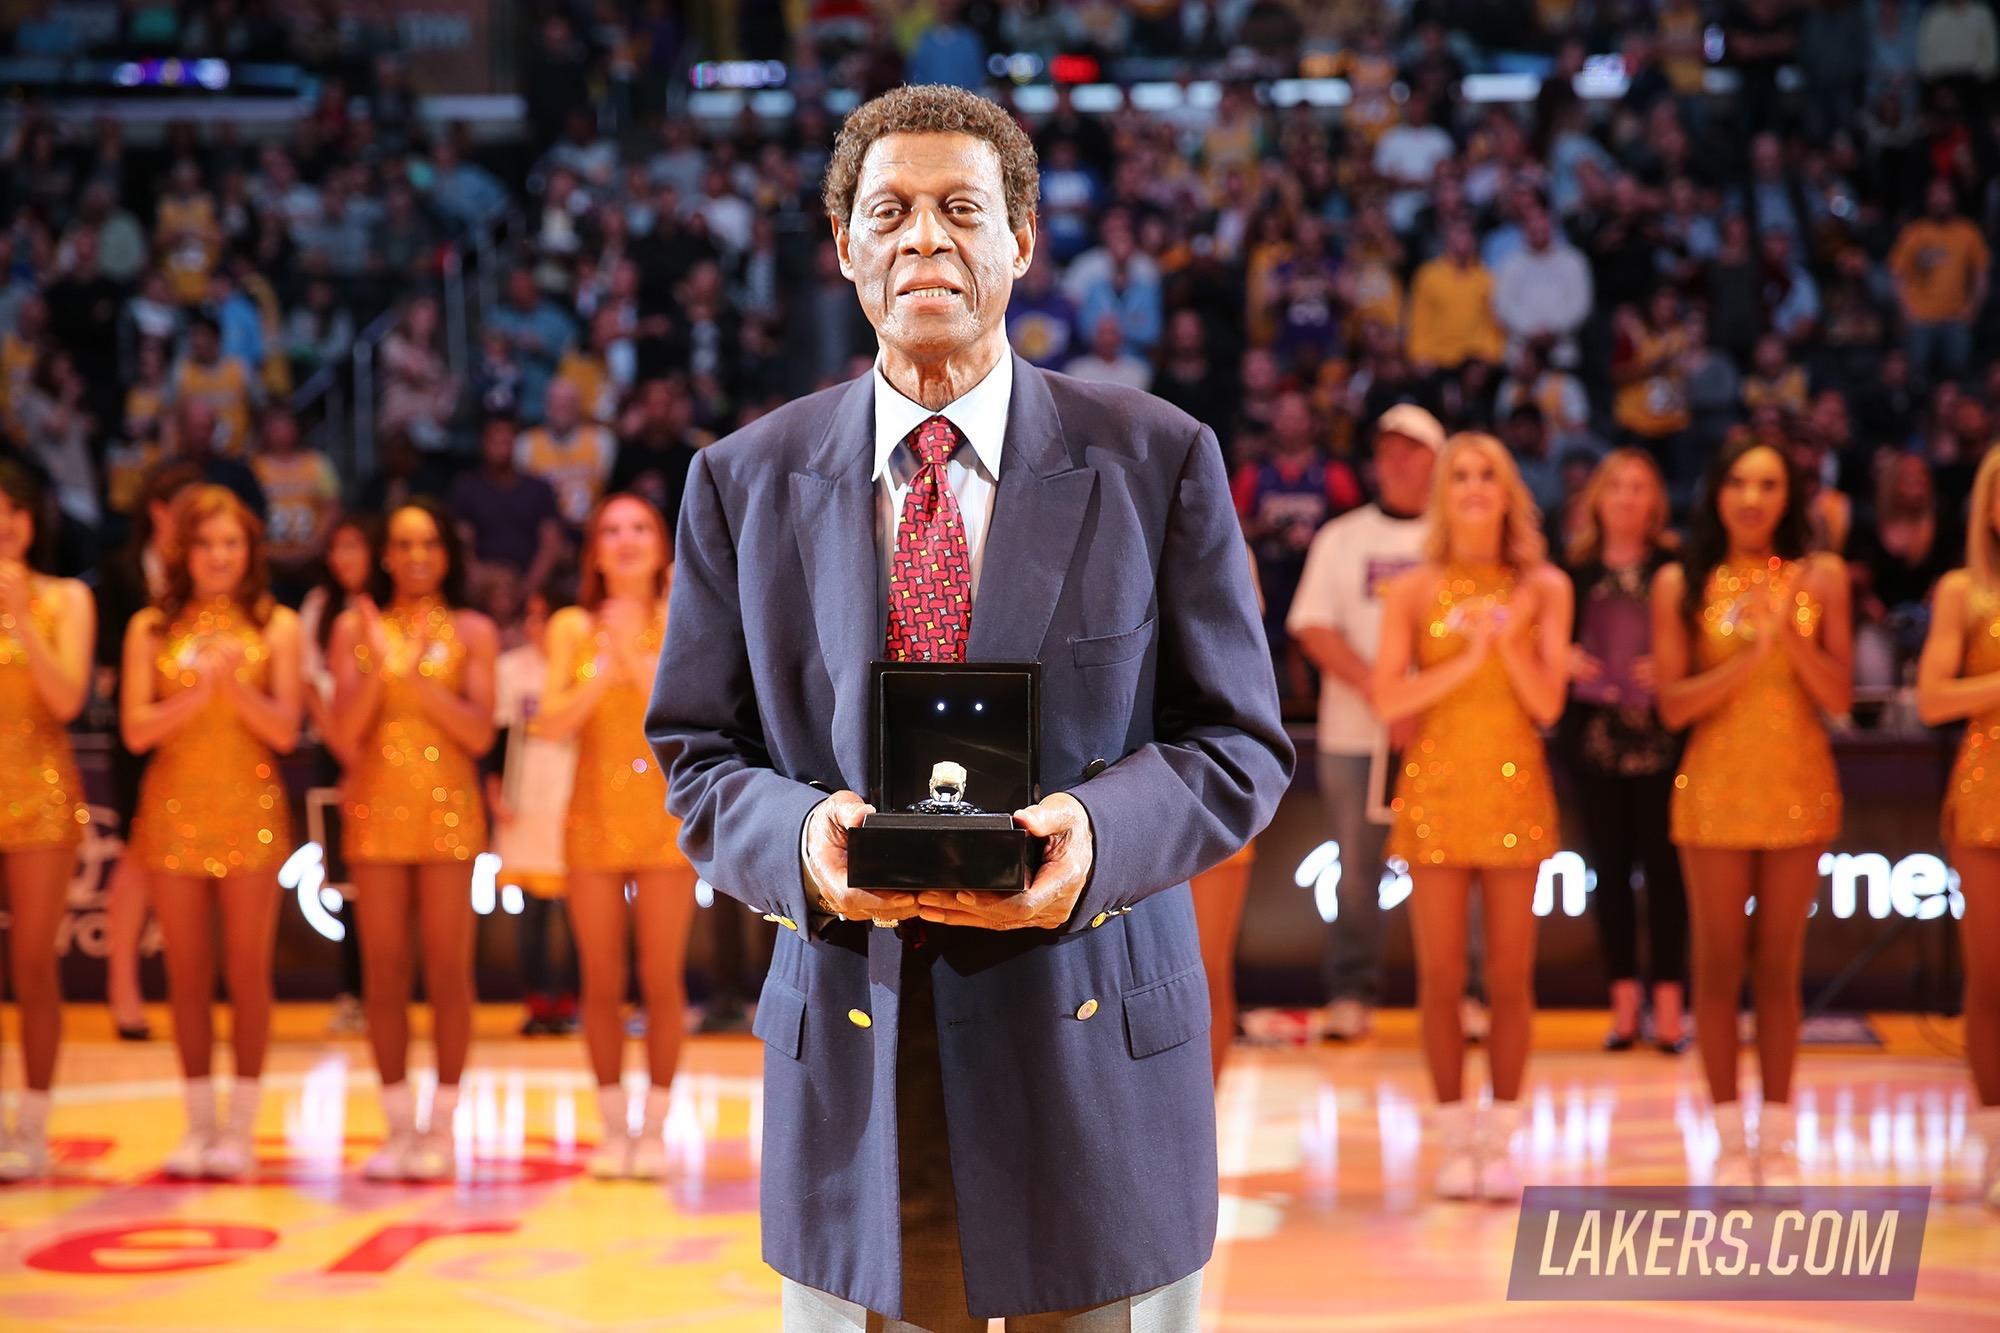 Lakers Celebrate Elgin Baylor's 80th Birthday. Los Angeles Lakers